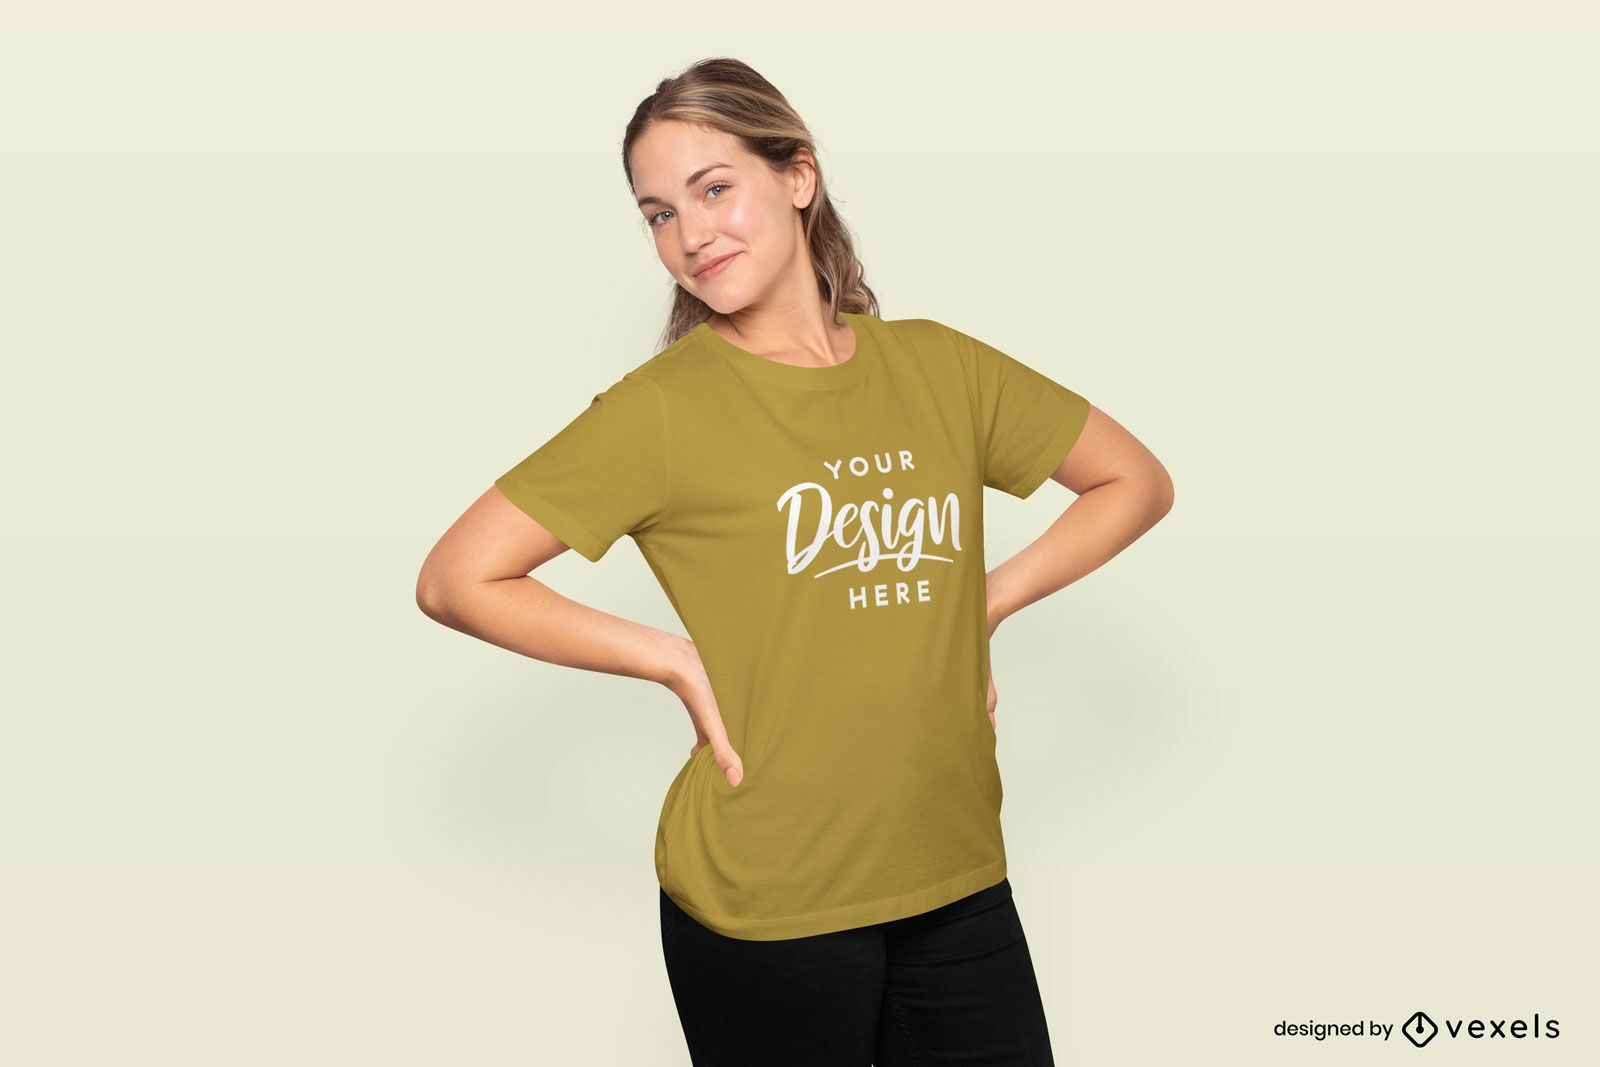 https://images.vexels.com/content/300055/preview/woman-with-hands-on-waist-t-shirt-mockup-aa256d.png